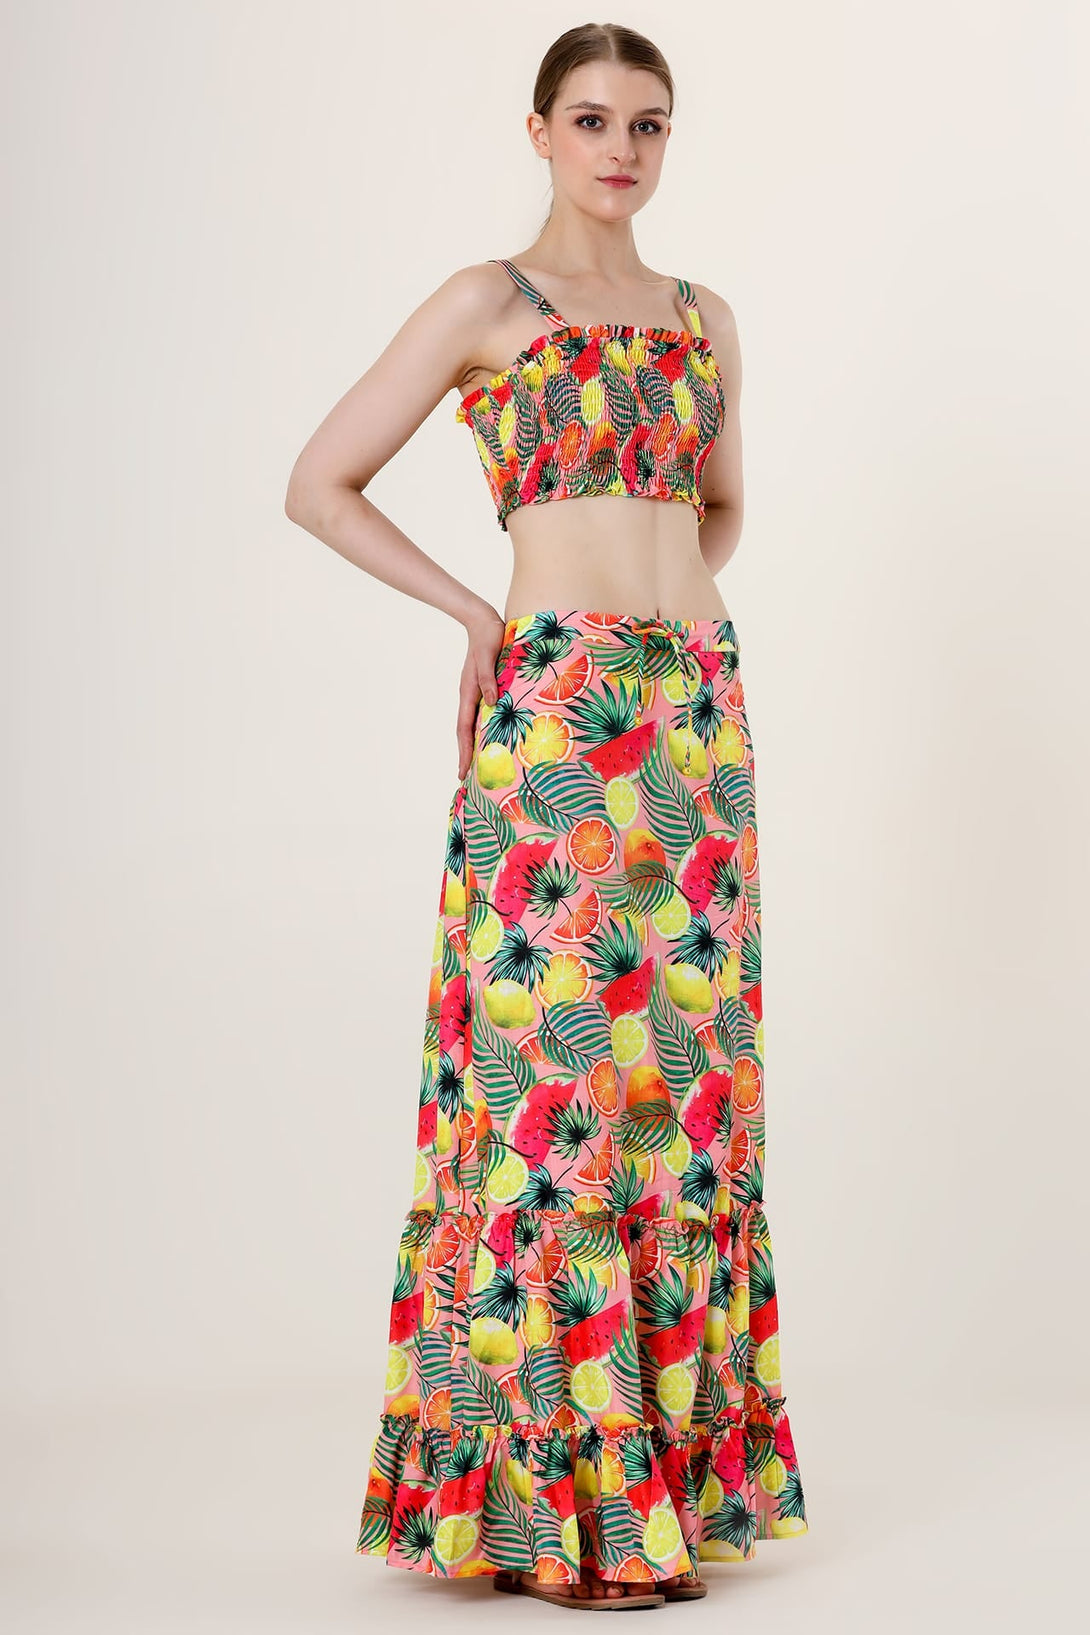 "pale yellow maxi skirt" "long cocktail dresses" "long dresses for women" "neon yellow maxi skirt"